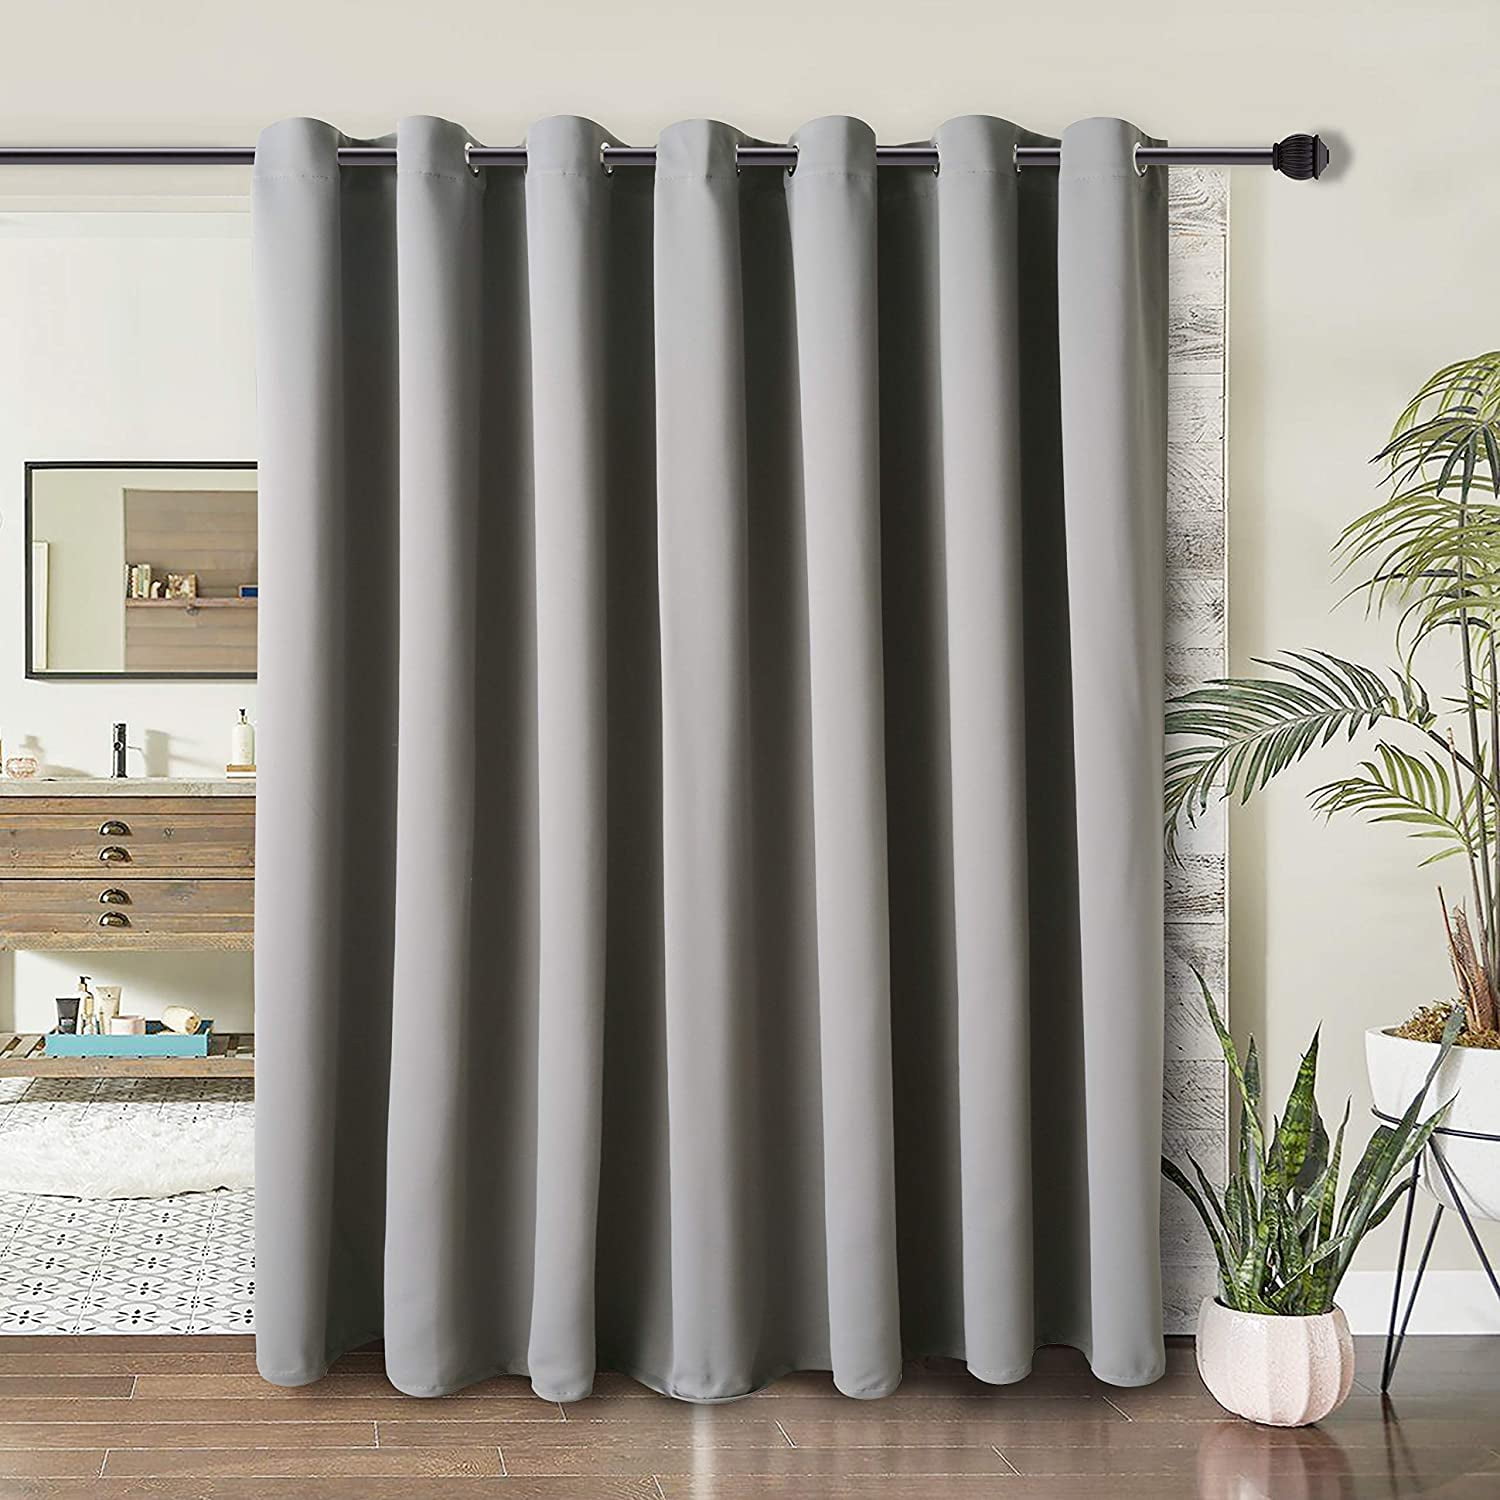 Details about   1 PANEL INSULATE THERMAL WINDOW Blackout CURTAIN SPACE ROOM DIVIDER PARTITION 